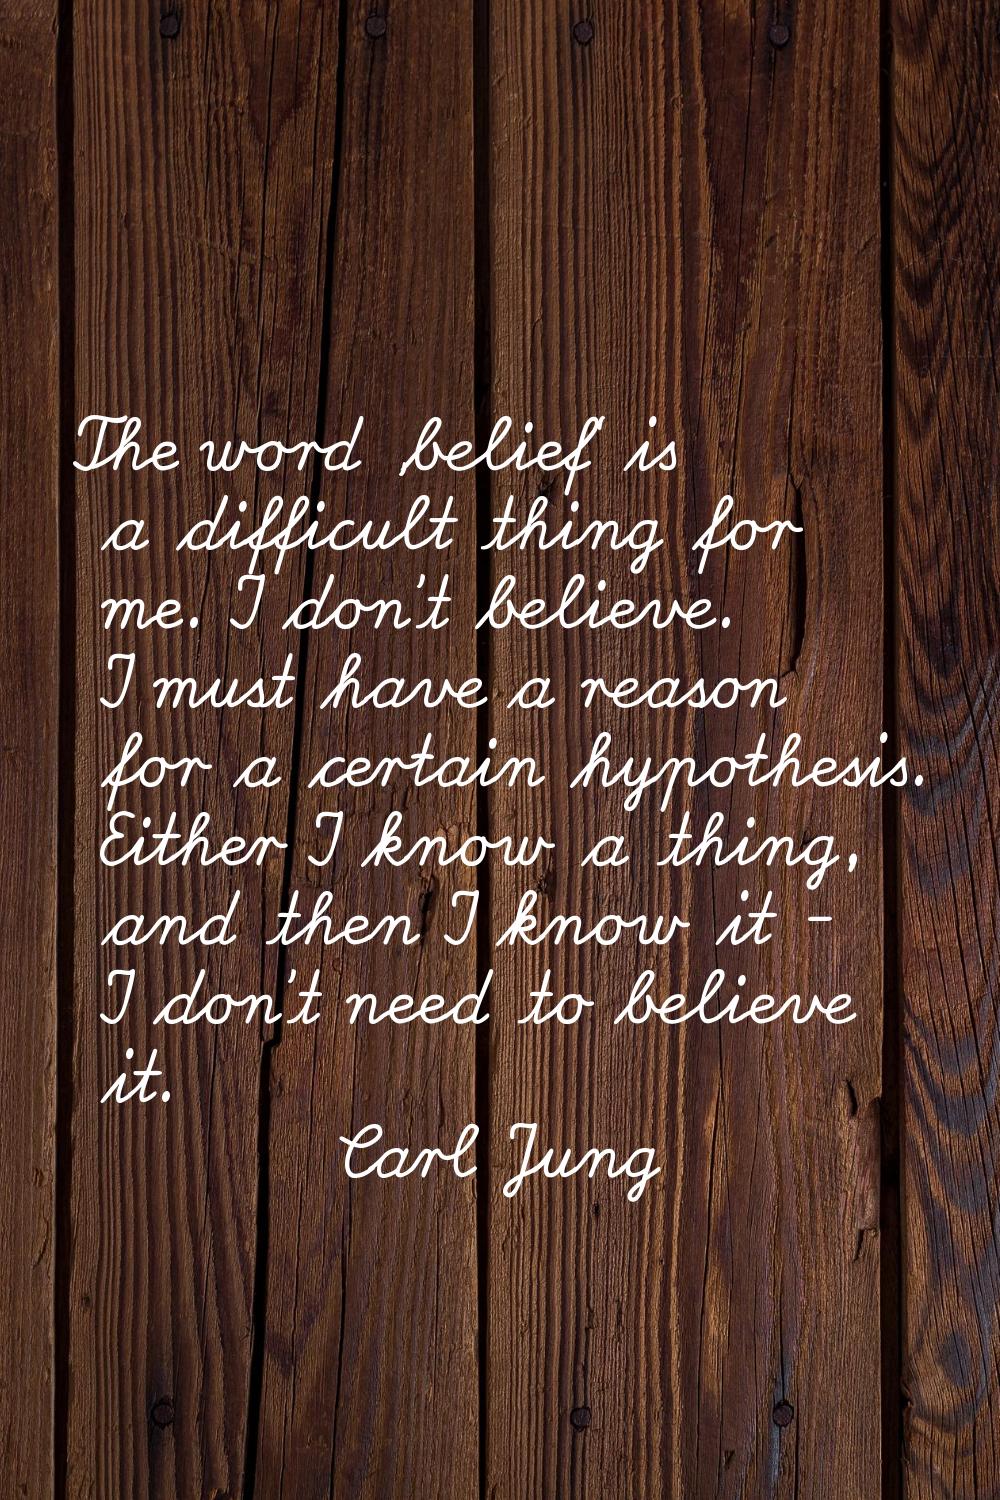 The word 'belief' is a difficult thing for me. I don't believe. I must have a reason for a certain 